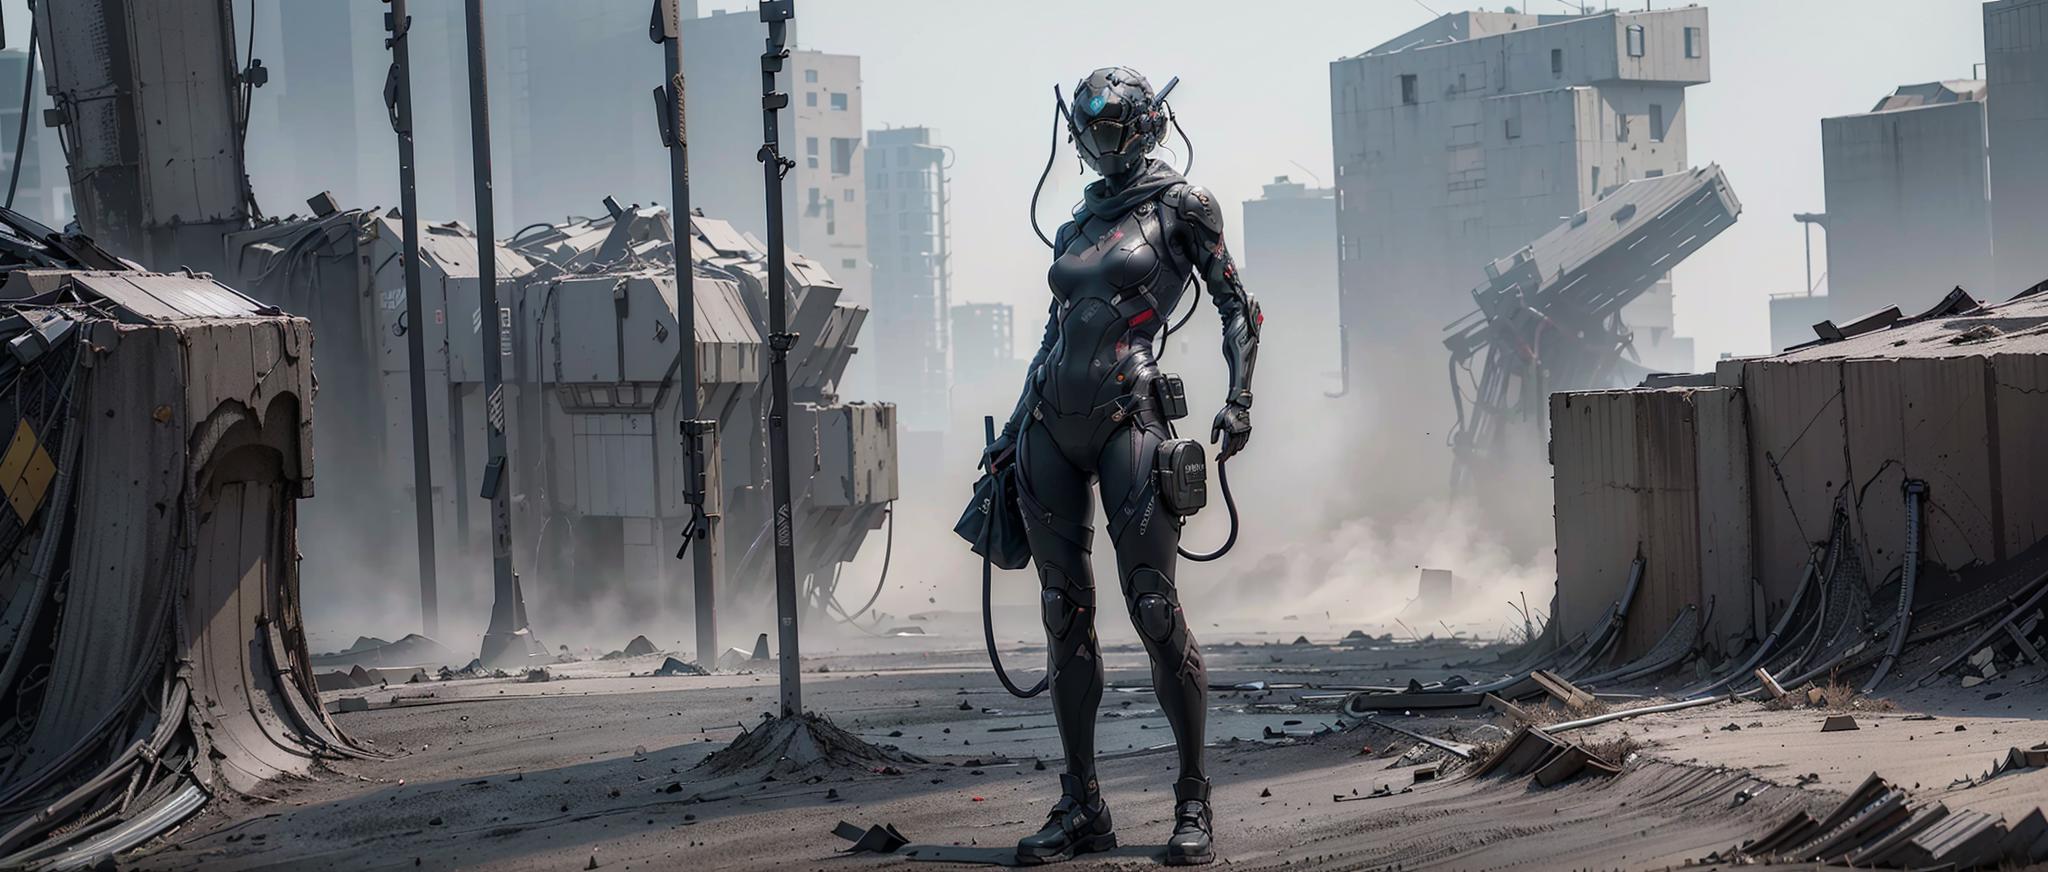 A robotic woman standing in a city setting.